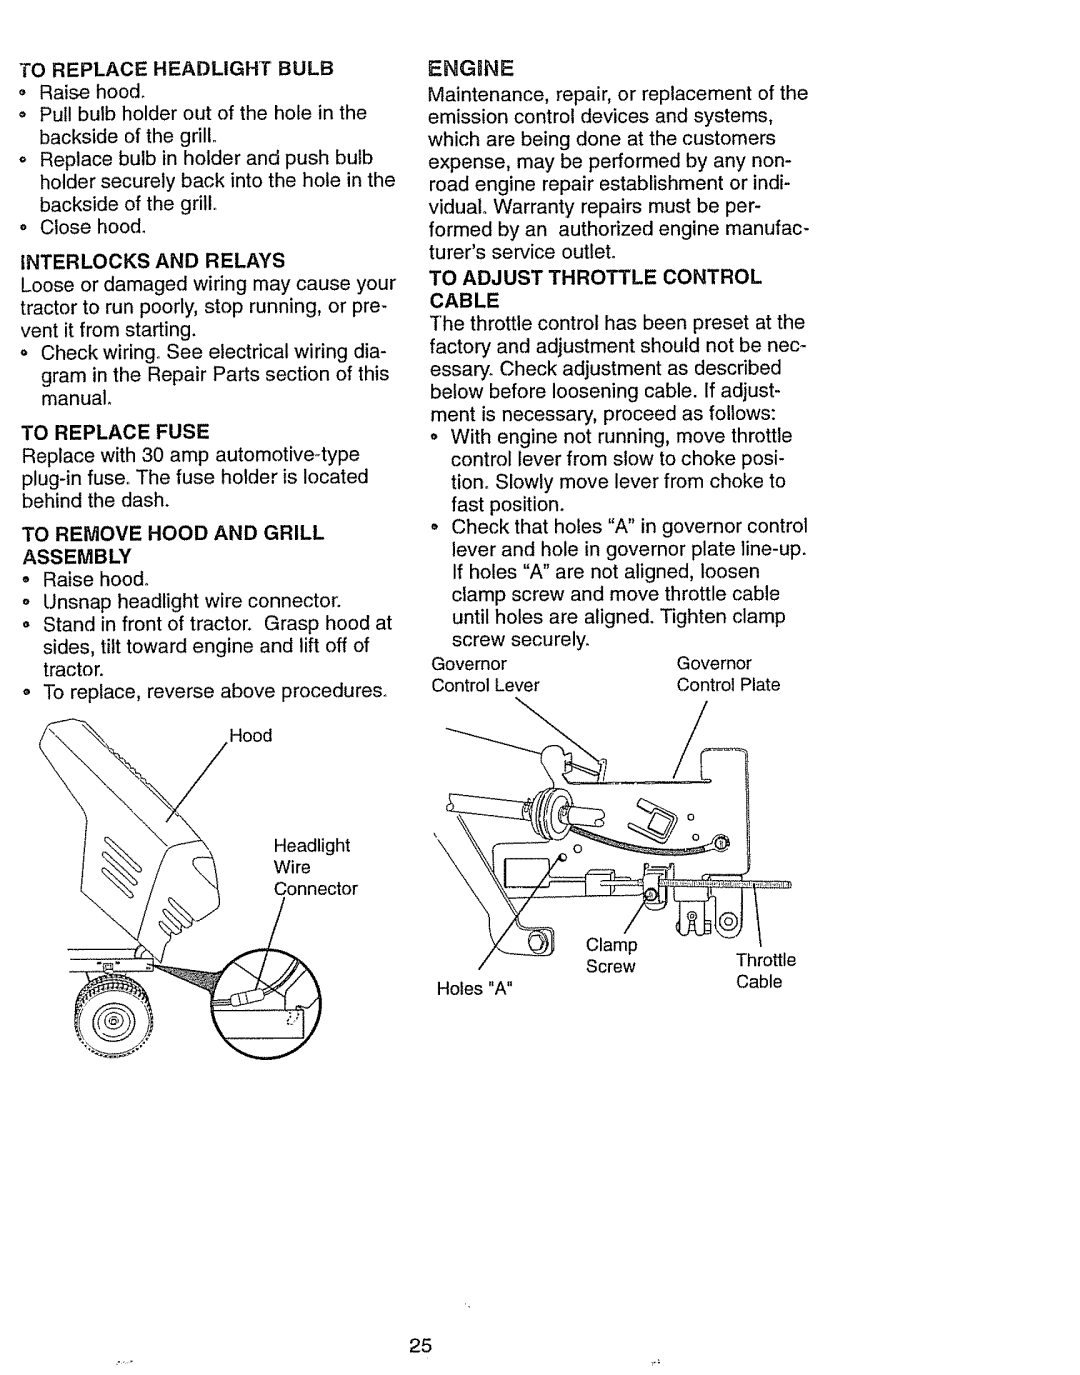 Craftsman 917.270631 owner manual To Replace Fuse, To Remove Hood And Grill Assembly 